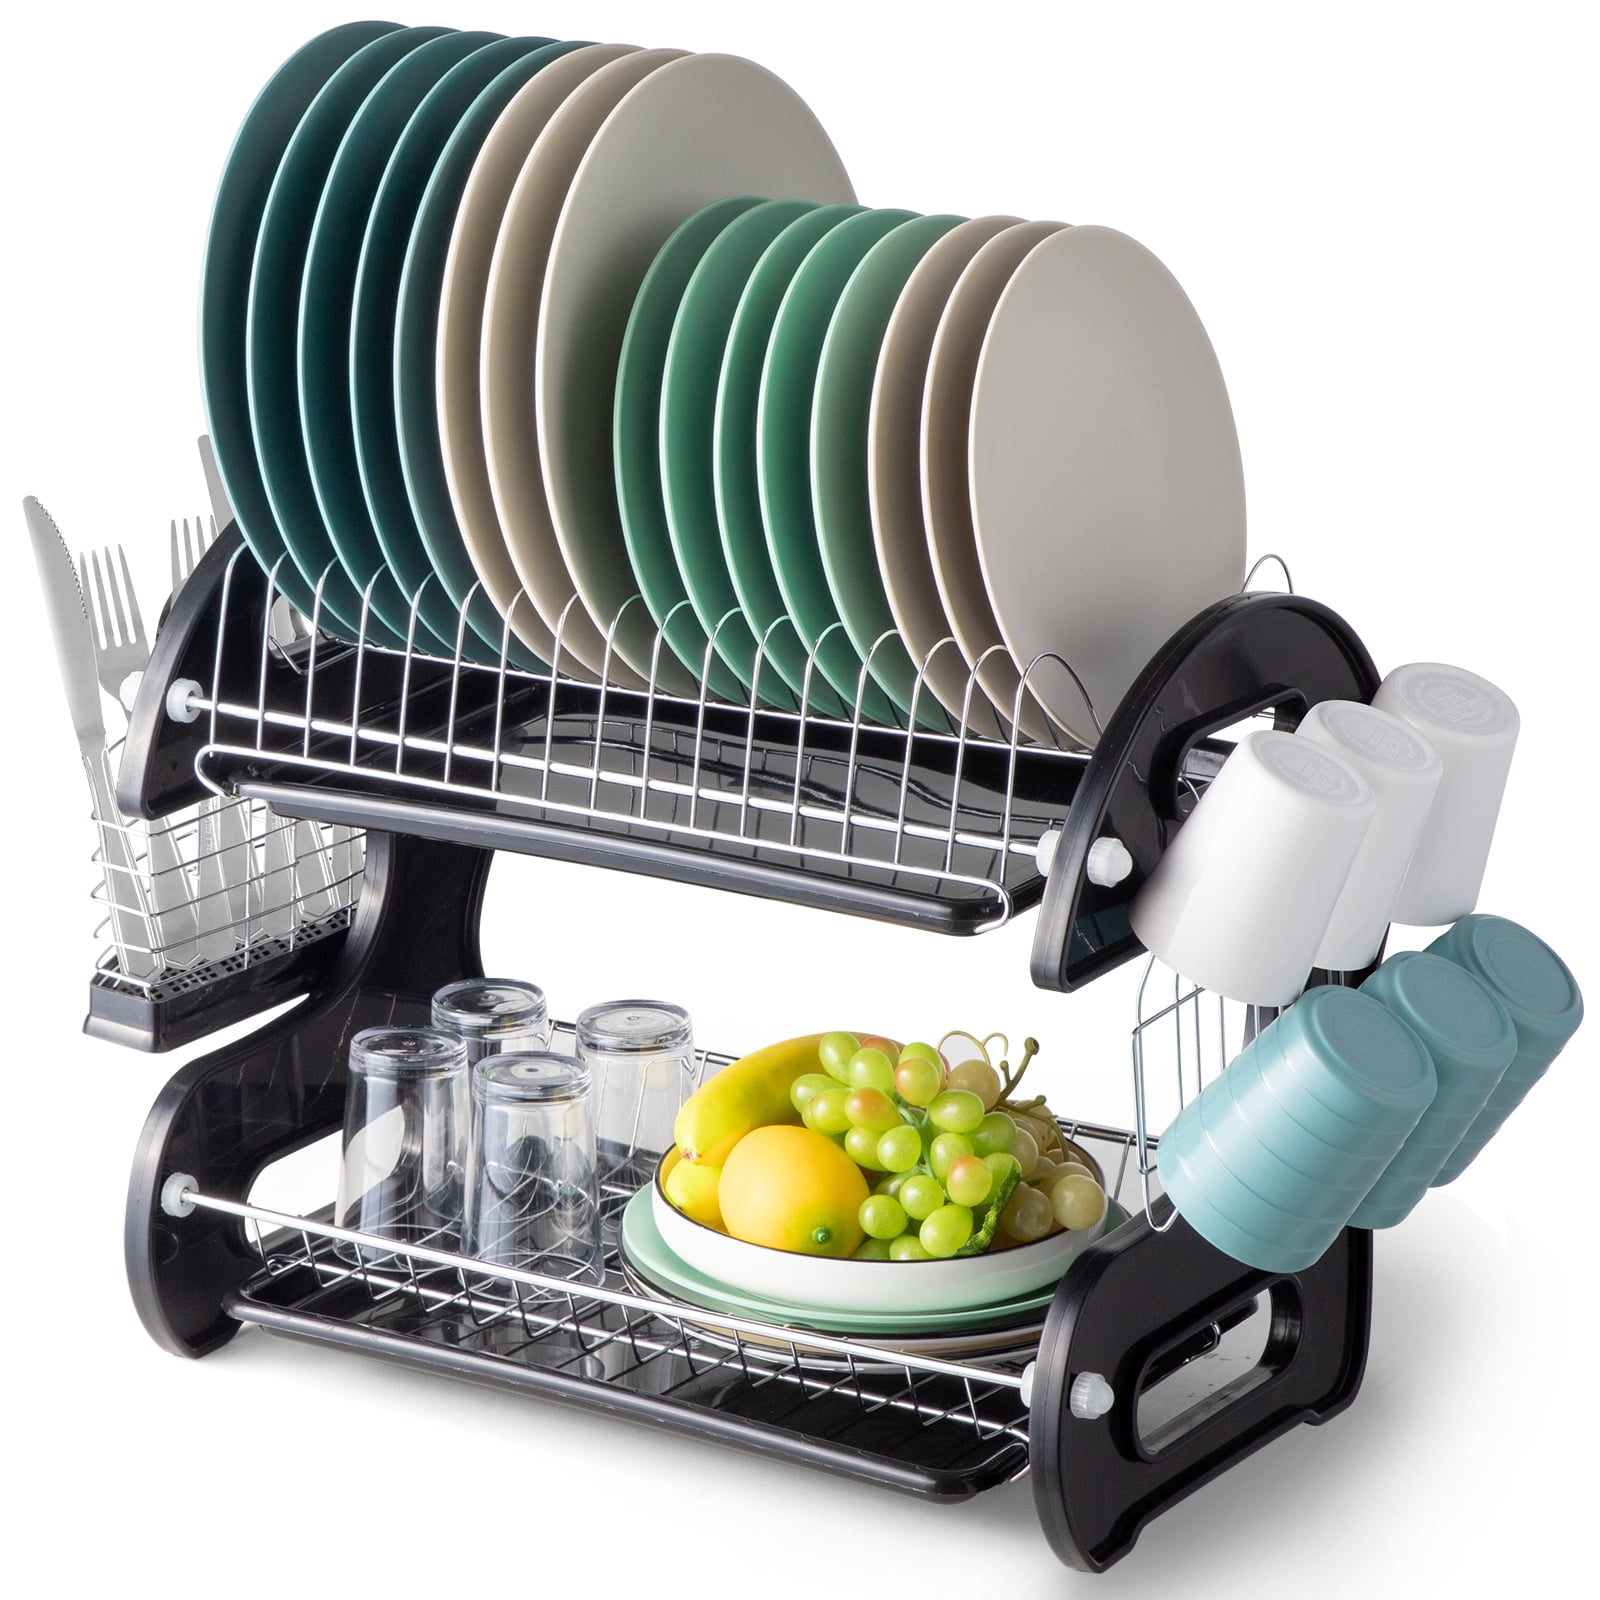 KOOTETA Dish Drying Rack, 2-Tier Dish Rack for Kitchen Counter, Space  Saving Kitchen Drying Rack, Dish Dryer Rack with Drainboard, Utensil Holder  and Cup Holders,With Black